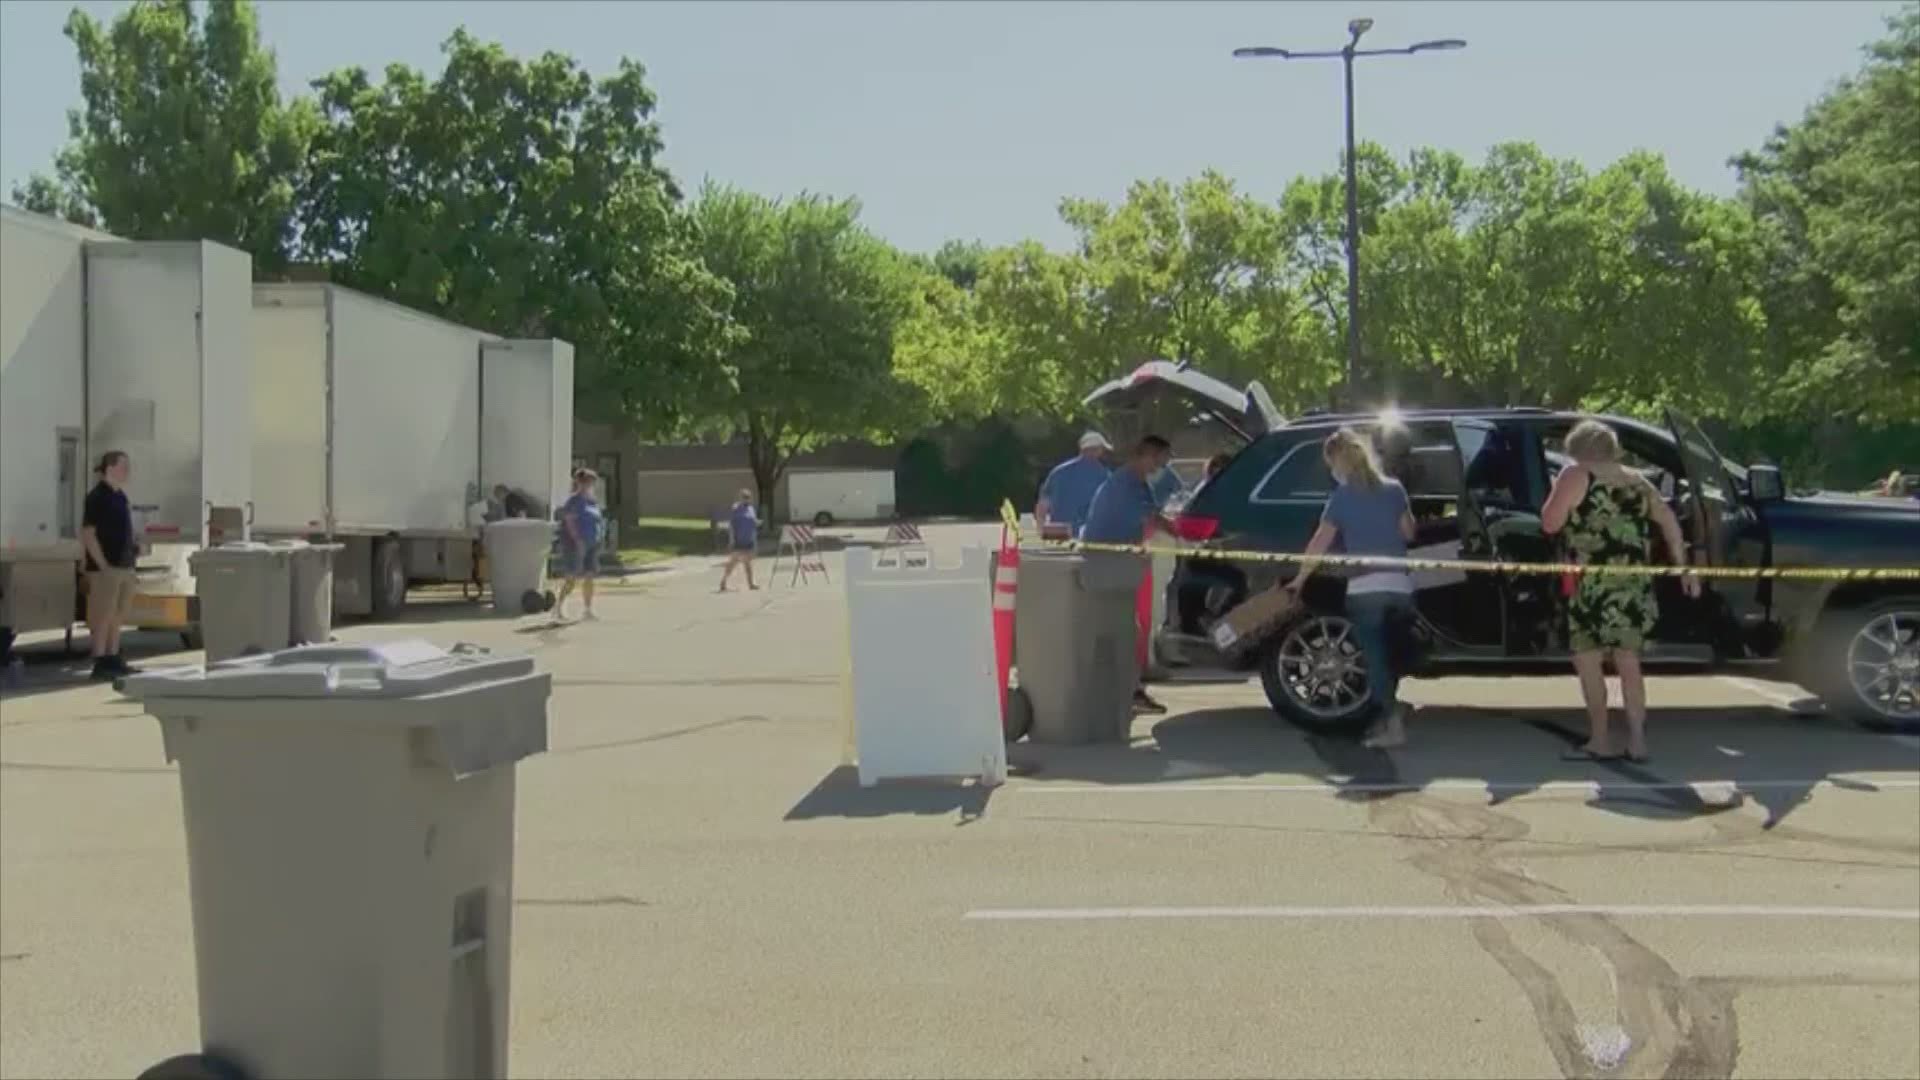 West Bank held a contact-free shred event in West Des Moines Saturday.